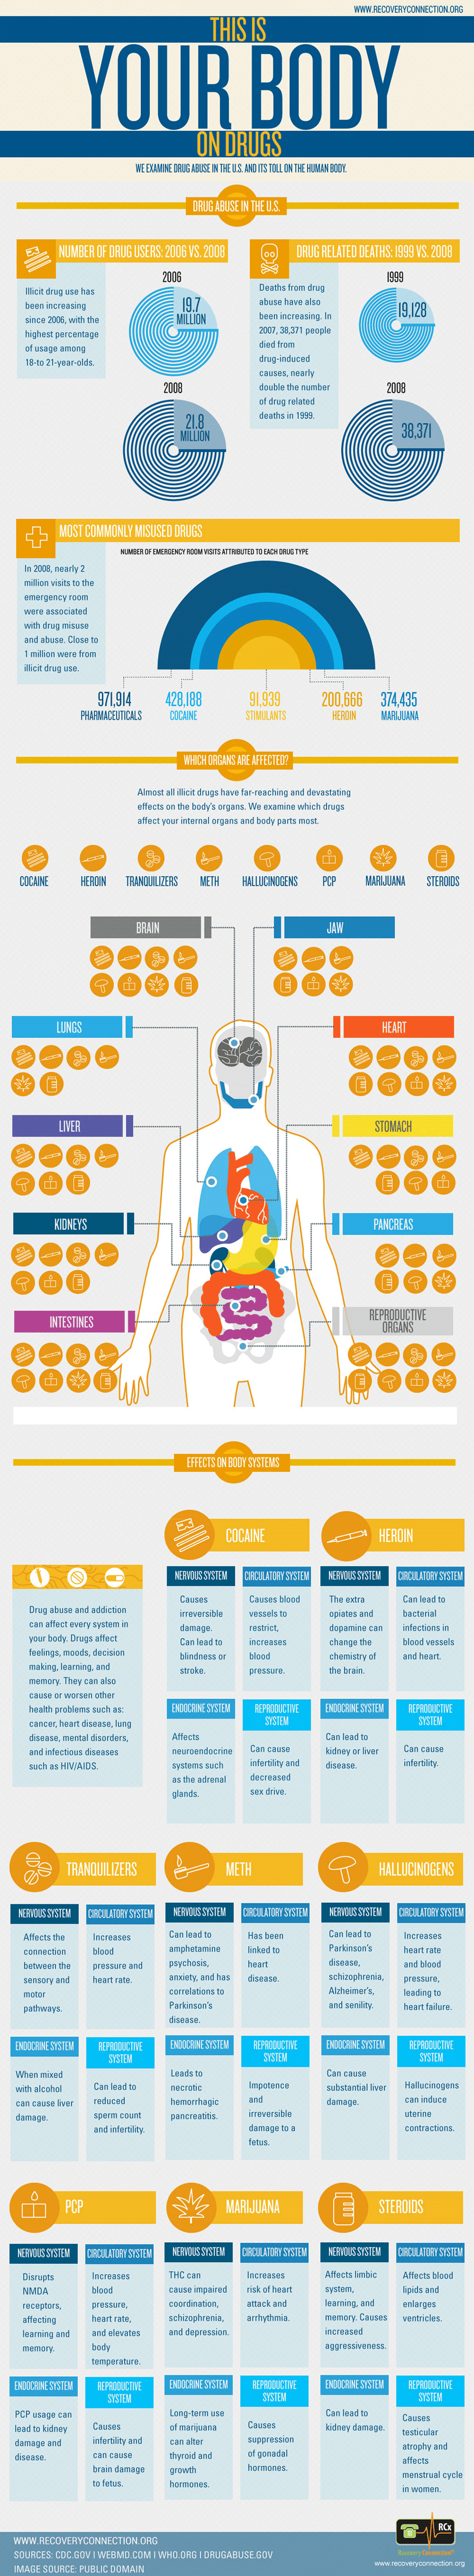 Drug Abuse and Your Body Infographic